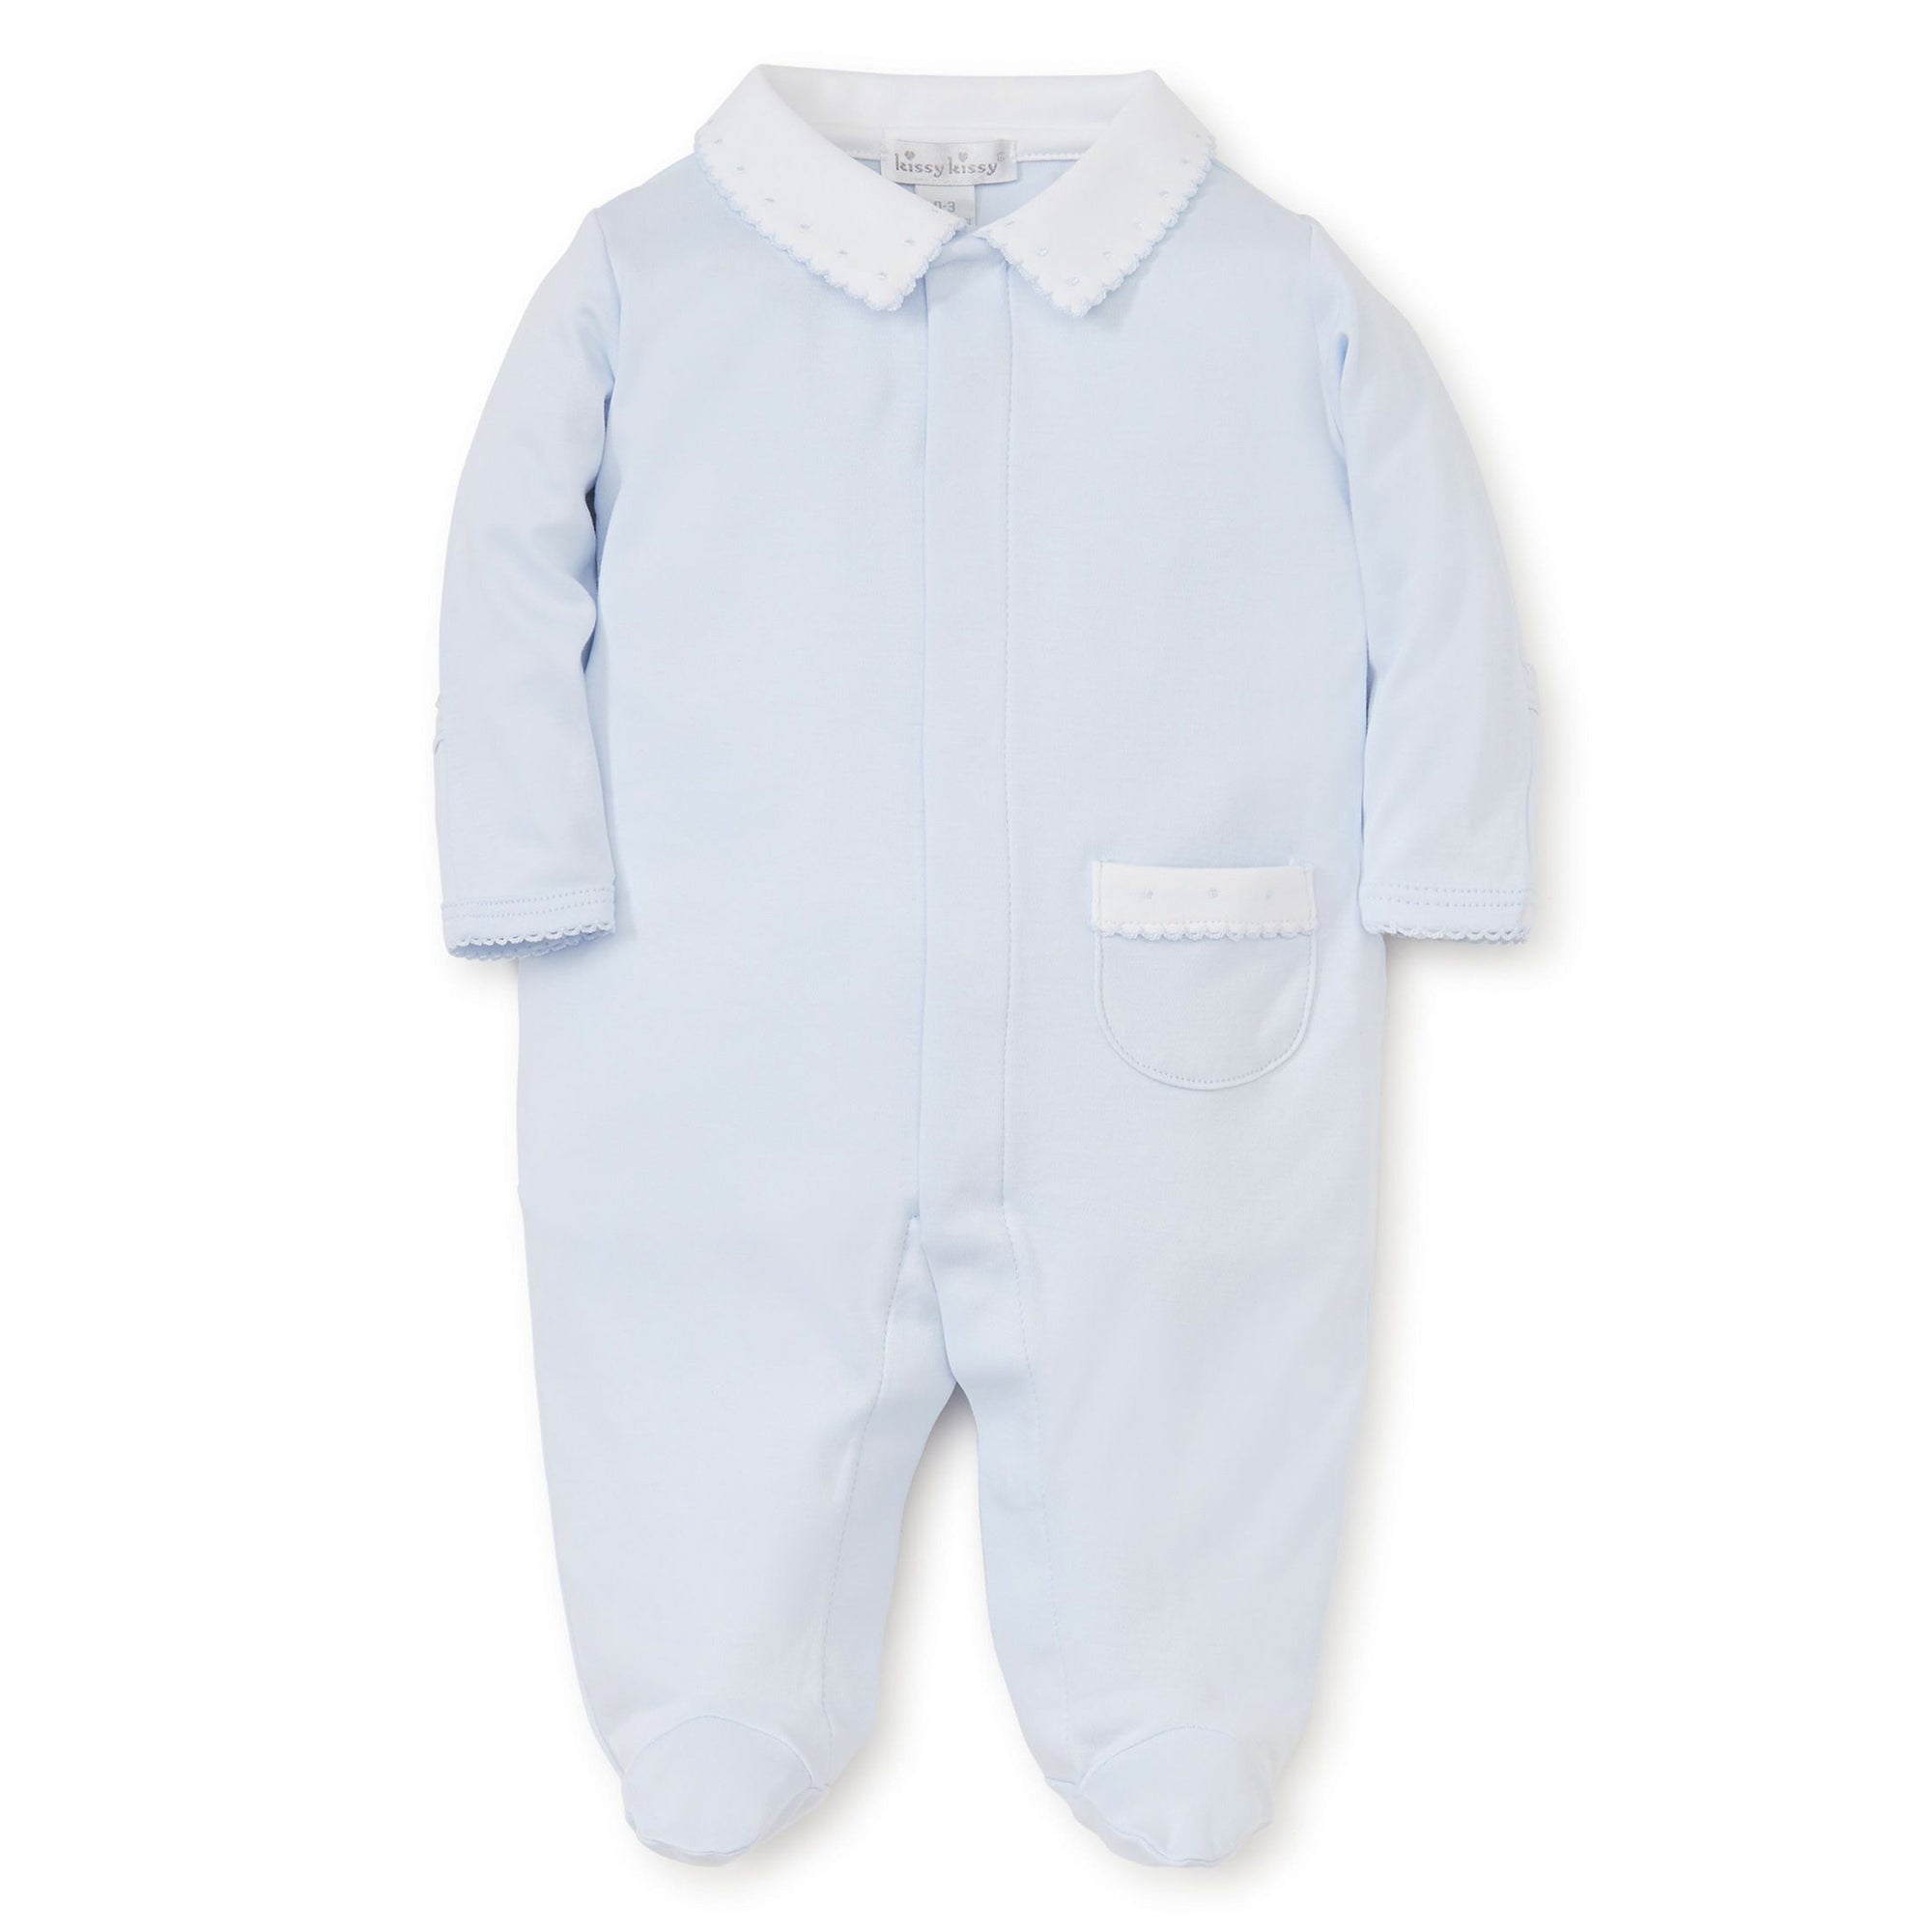 Kissy Kissy Baby Boy's Light Blue New Beginnings Footie with Collar